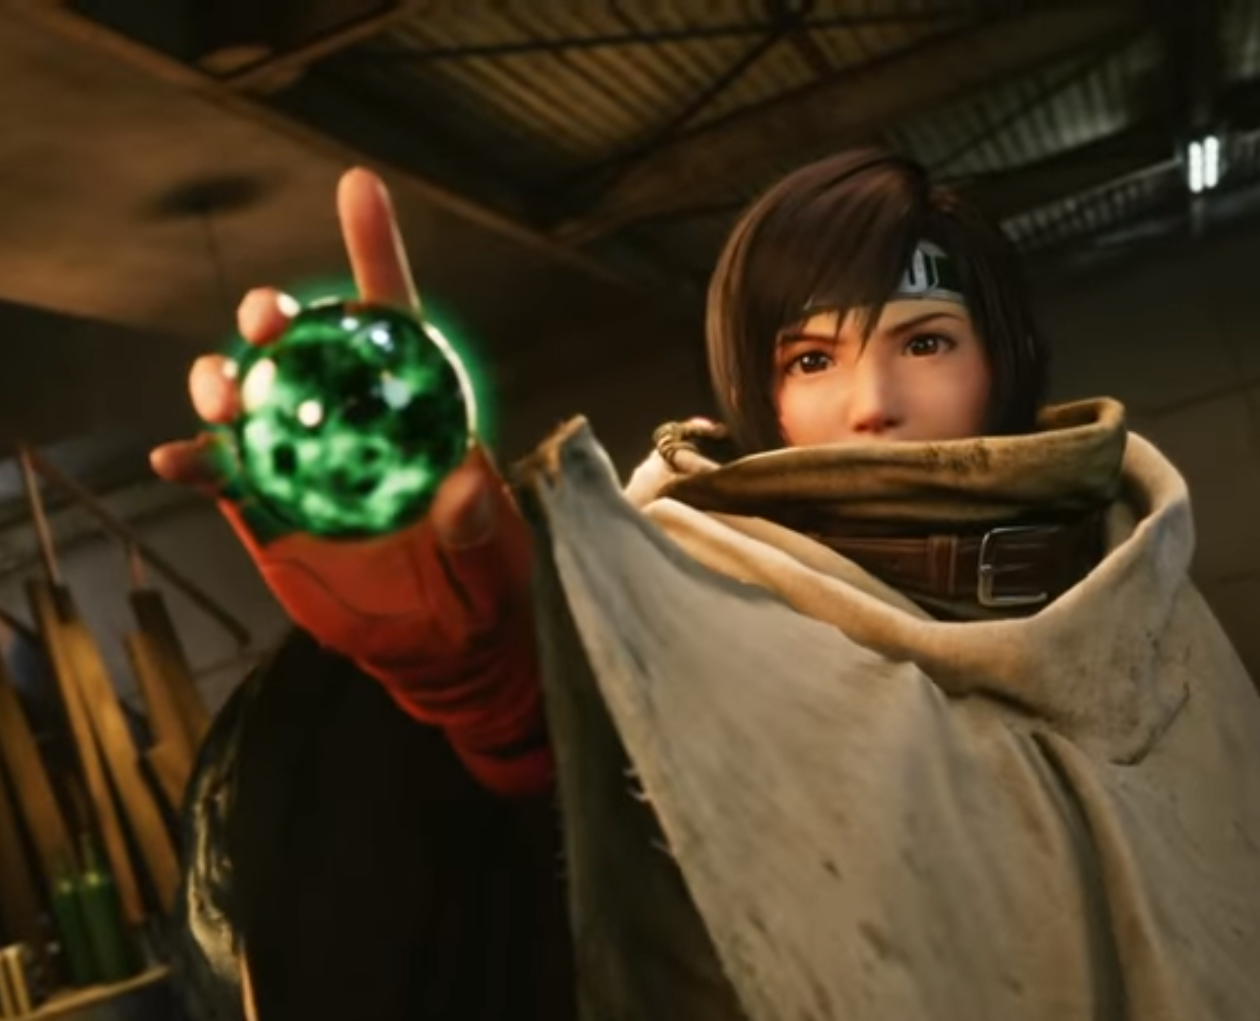 ‘Final Fantasy VII Remake Intergrade’ Coming to the PlayStation 5: Square Enix Adds Yuffie Kisagari